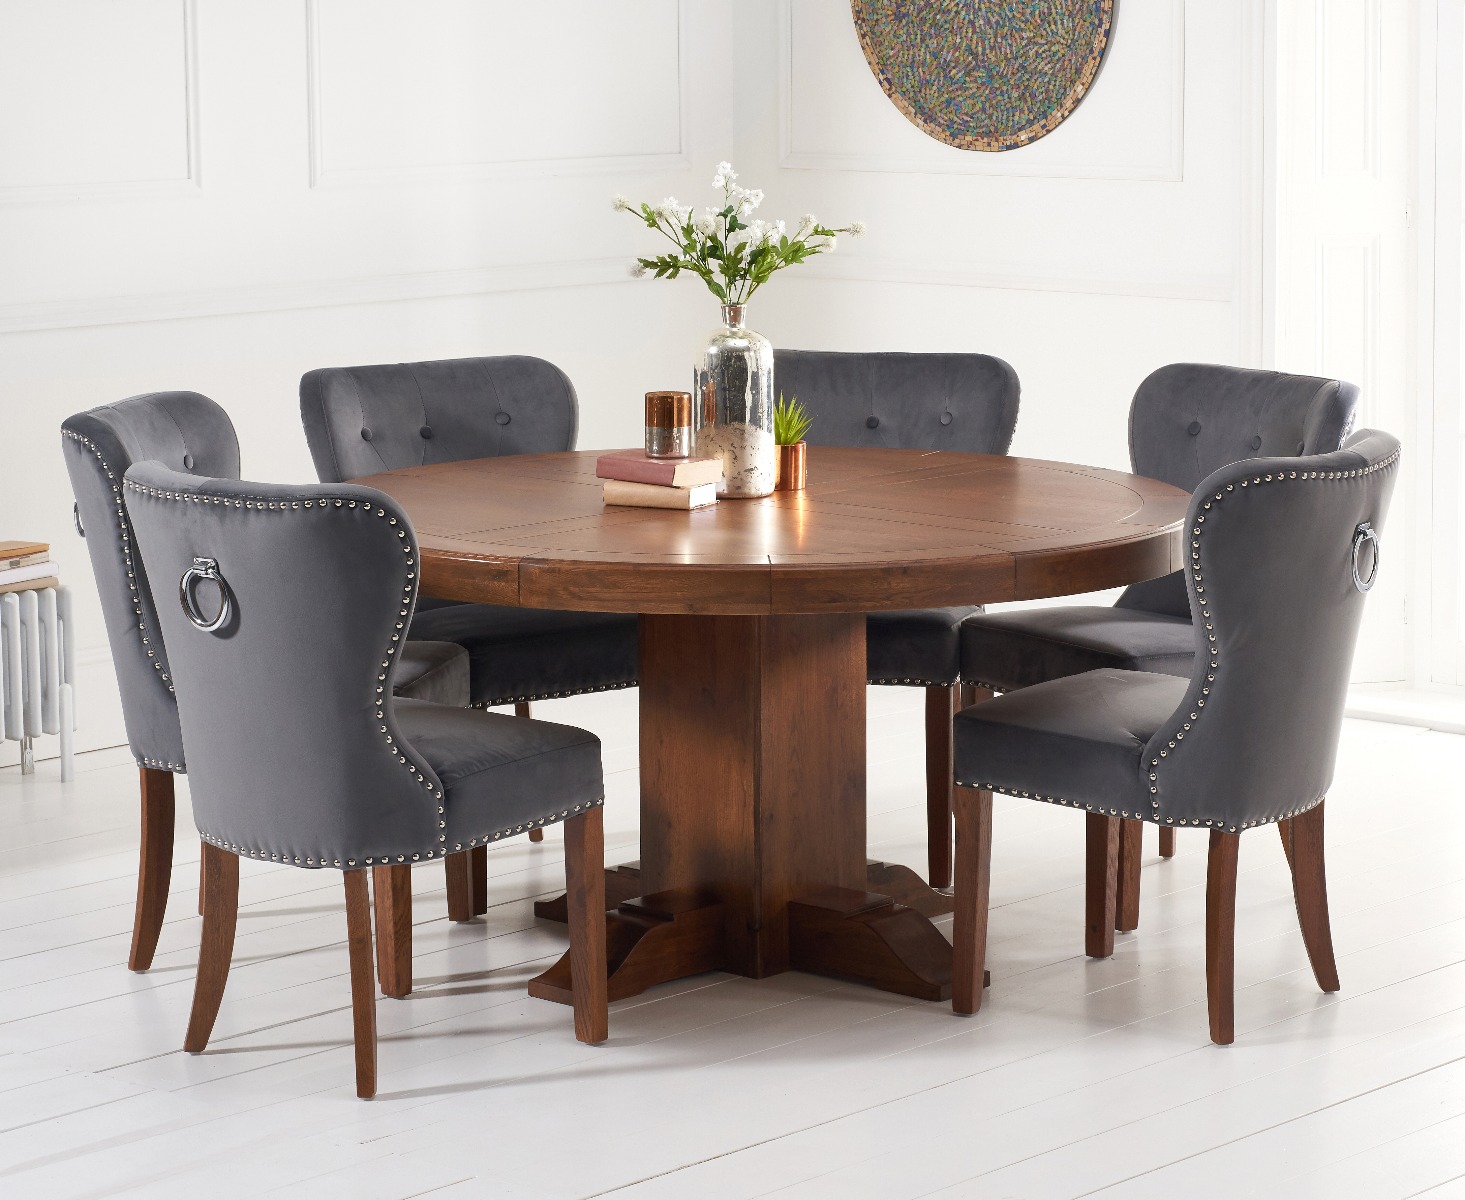 Photo 1 of Helmsley 150cm dark oak round pedestal dining table with 6 grey keswick chairs